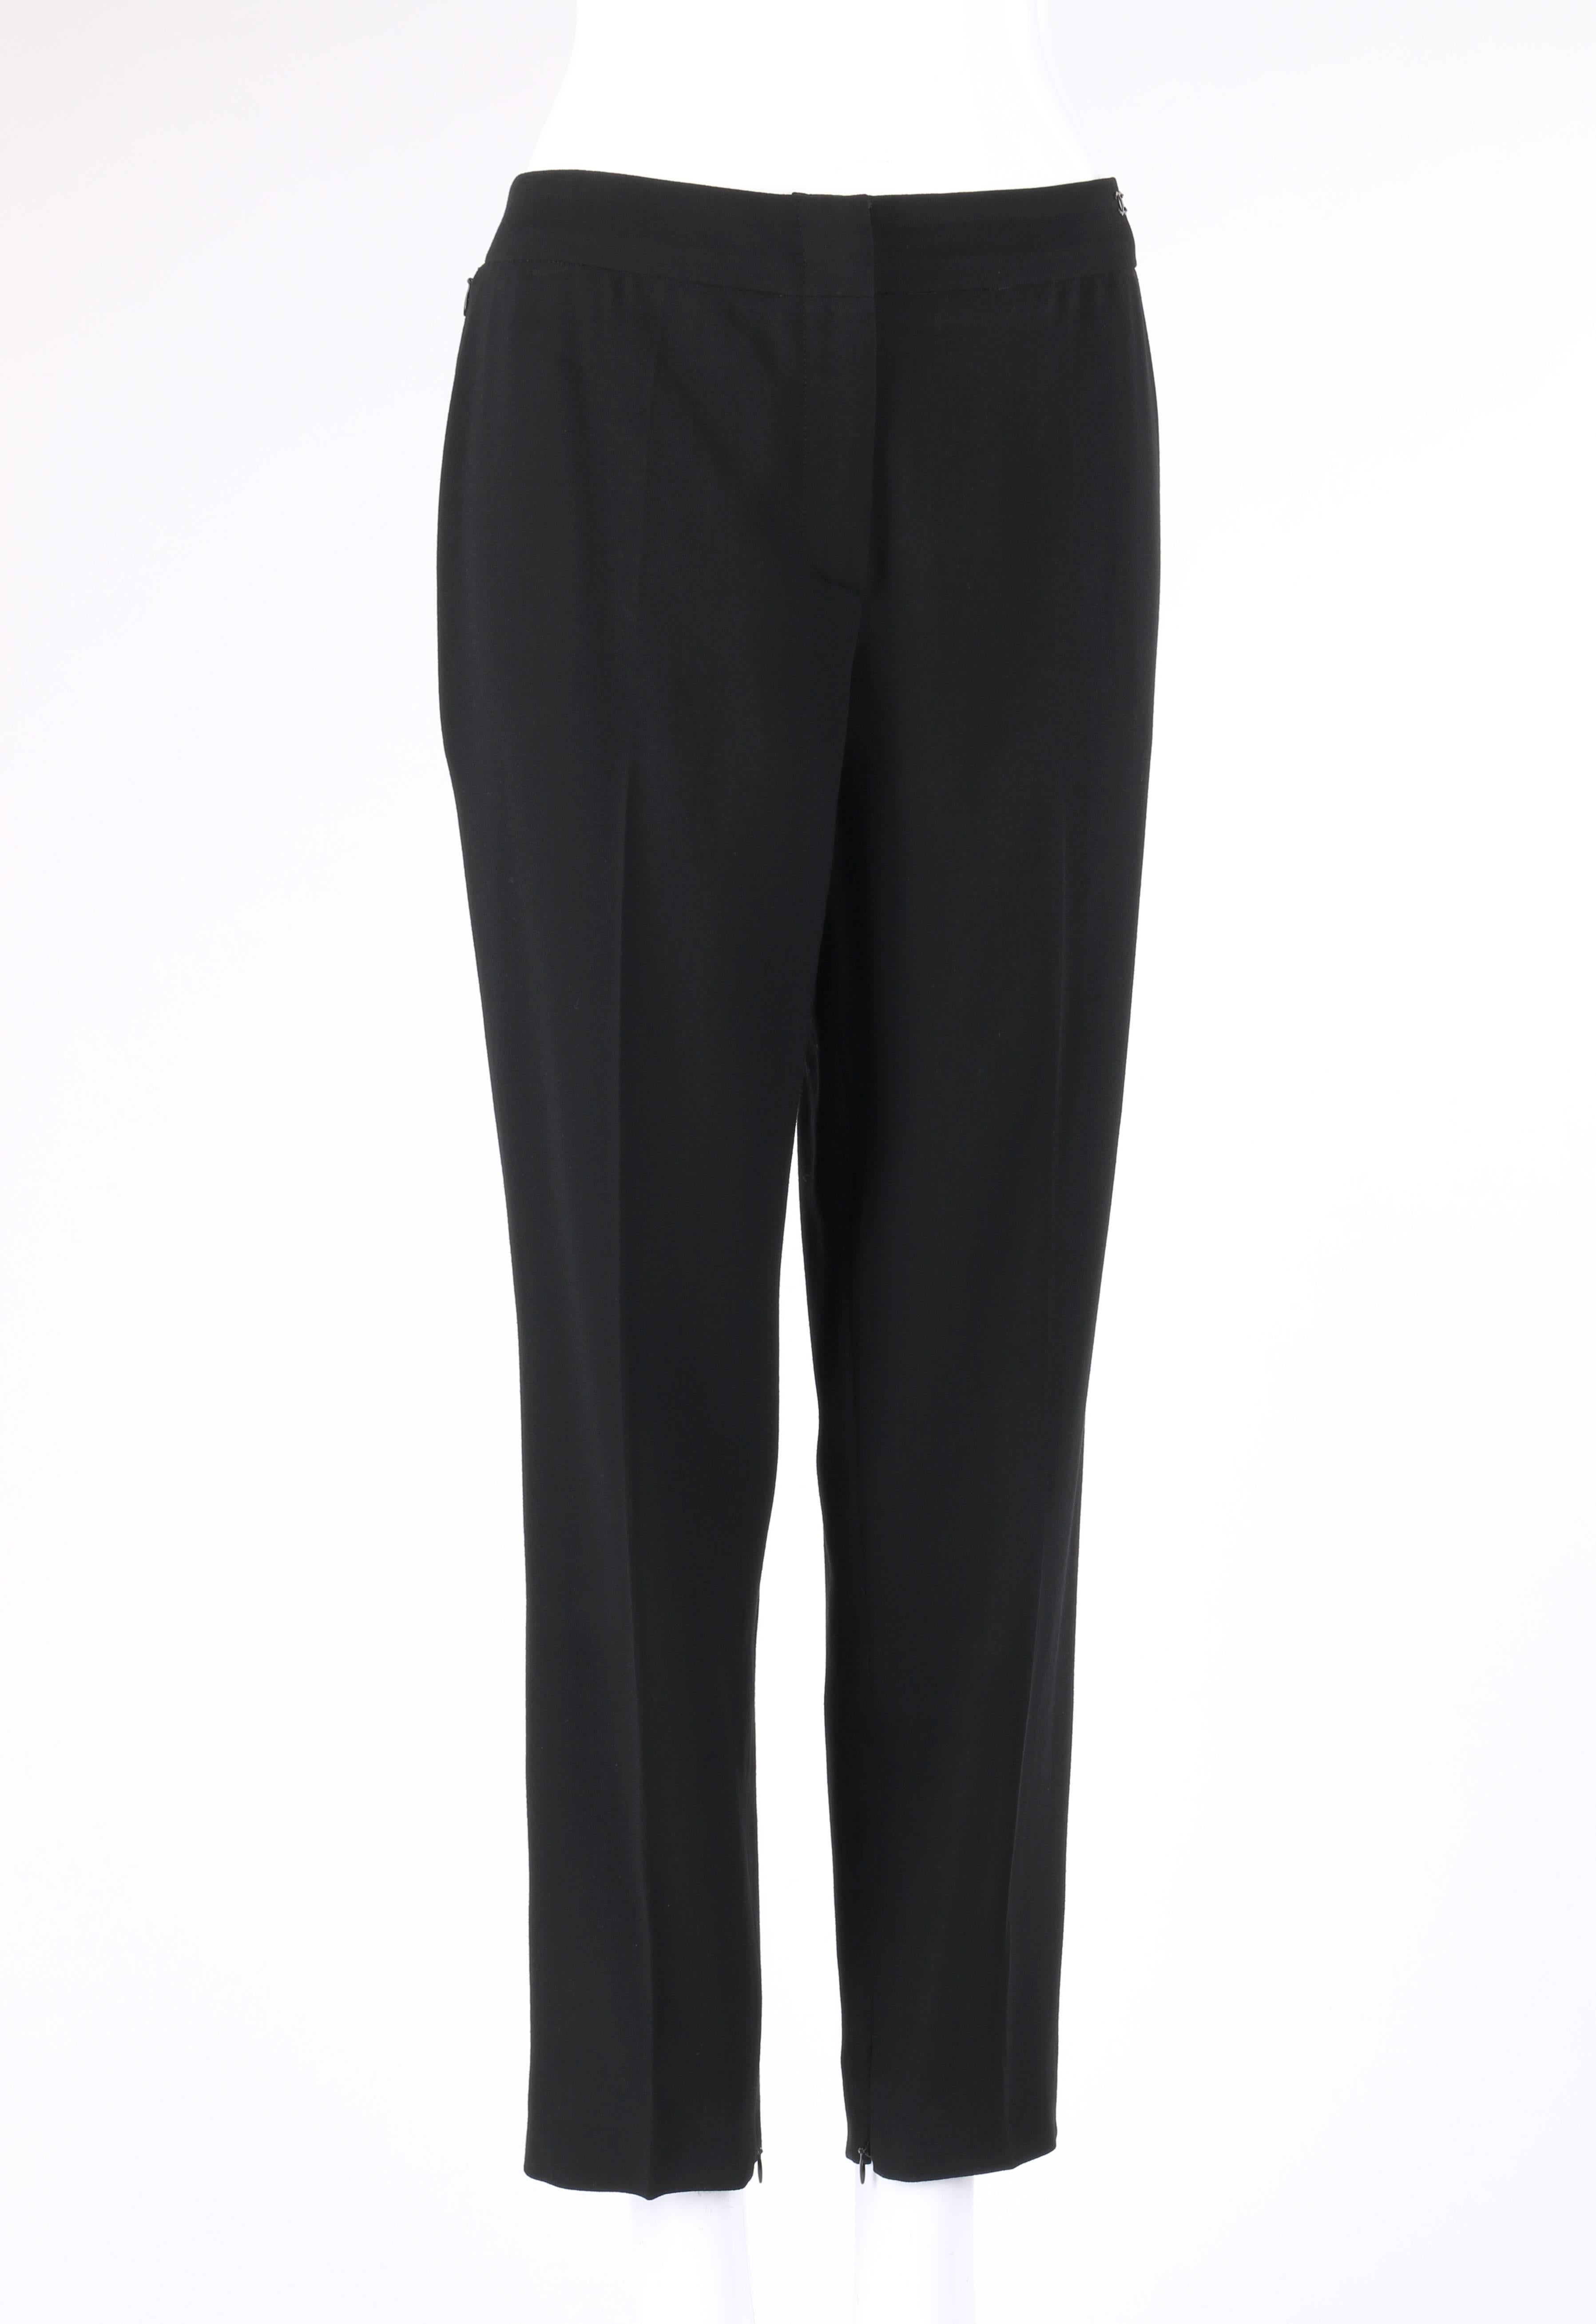 Chanel Spring/Summer 2003 classic black wool slim cut cropped pants / trousers. Designed by Karl Lagerfeld. Thin banded waist. Center front zip fly with two hook and bar closures at top. Two side seam invisible zipper closure pockets at hips. Black